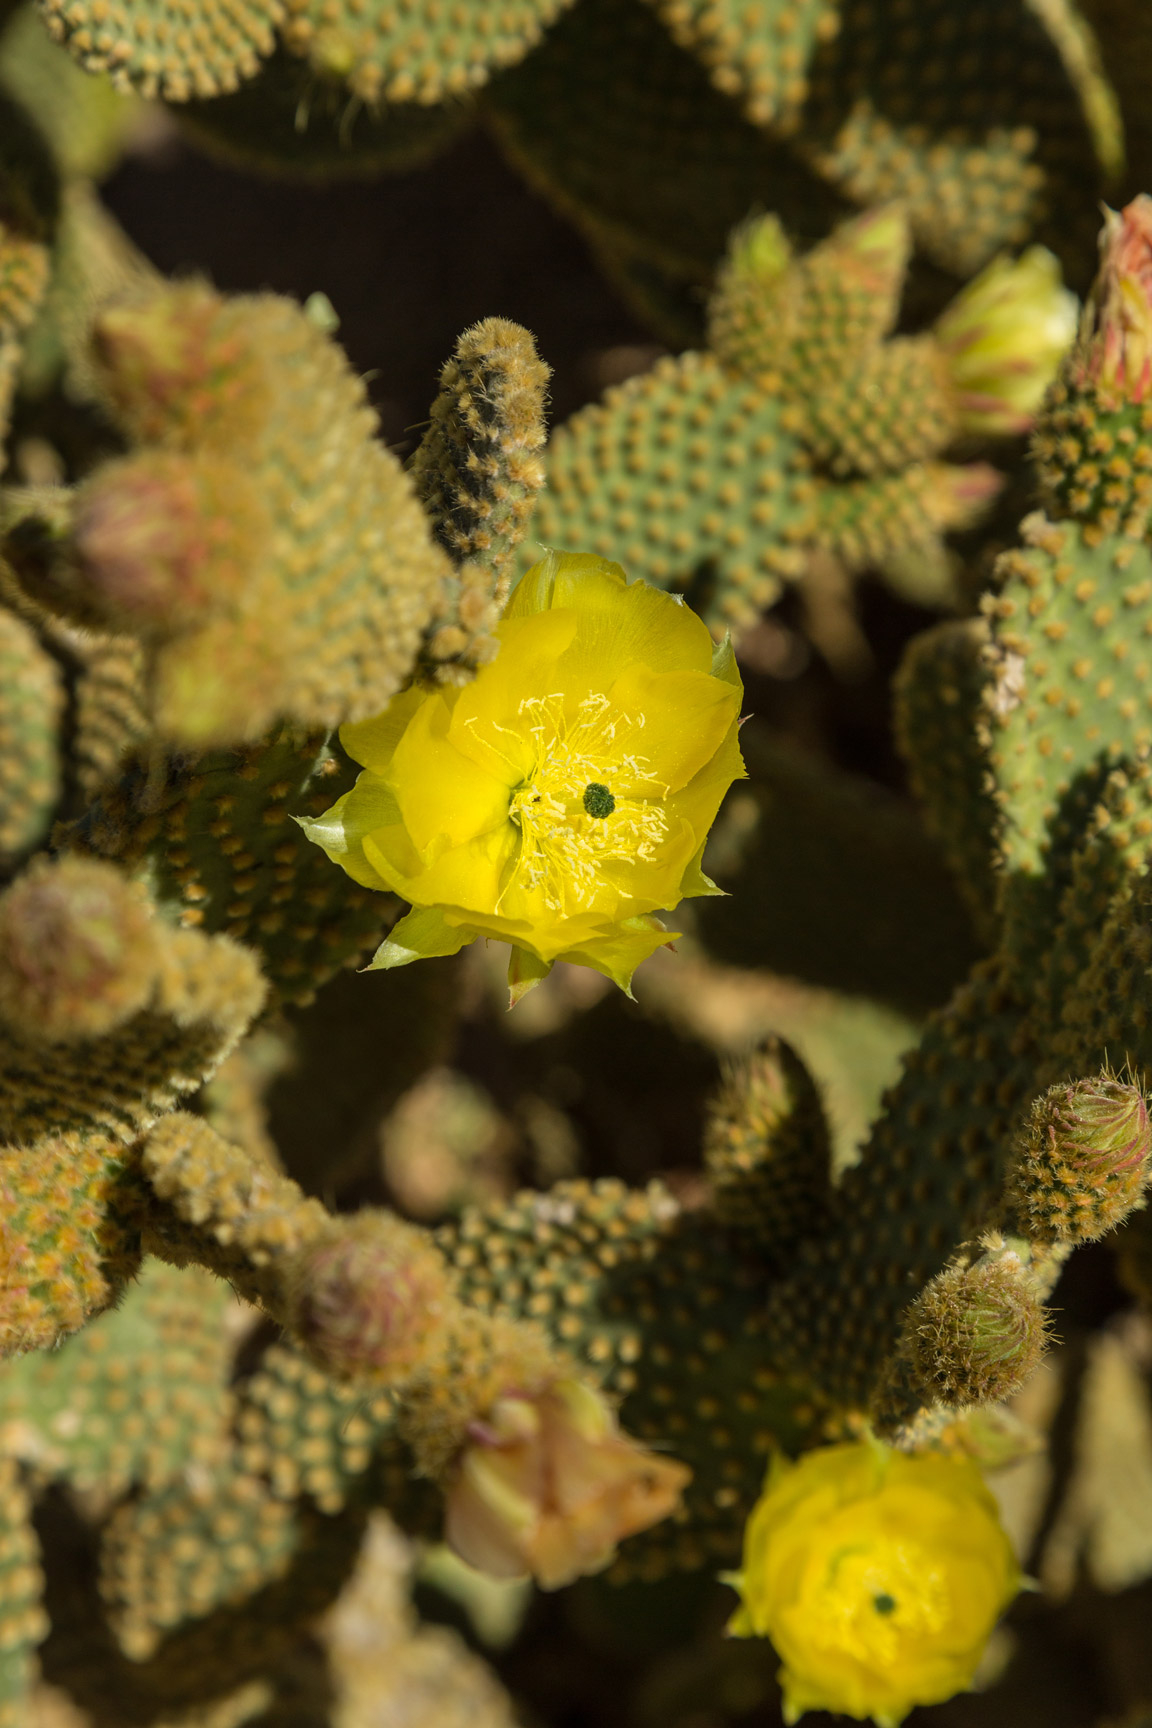 Looking down into the blooming flowers of the Bunny Ear cactus.